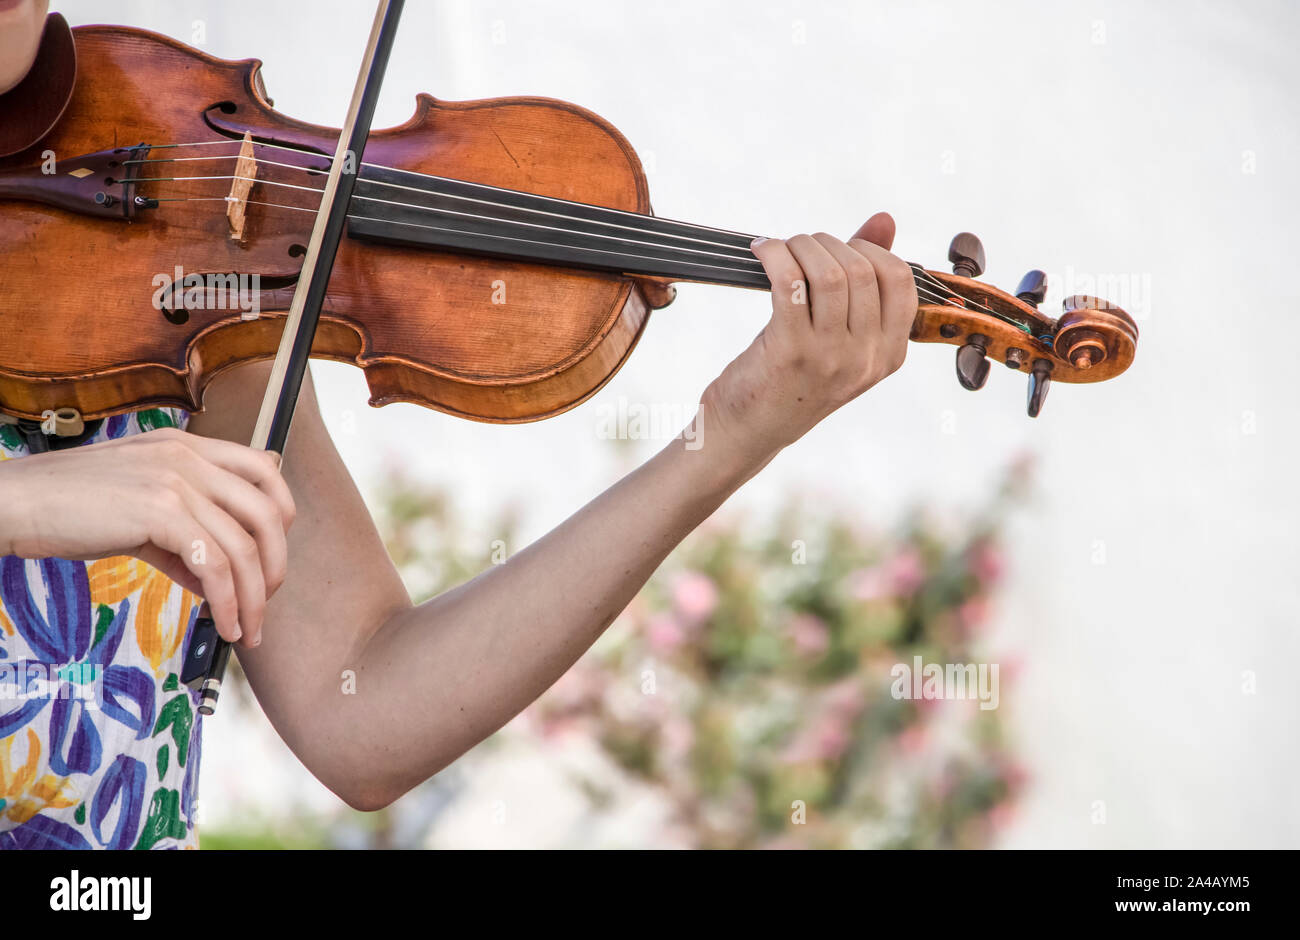 Cropped view of woman in flowered dress playing a violin against blurred white background with flowers Stock Photo